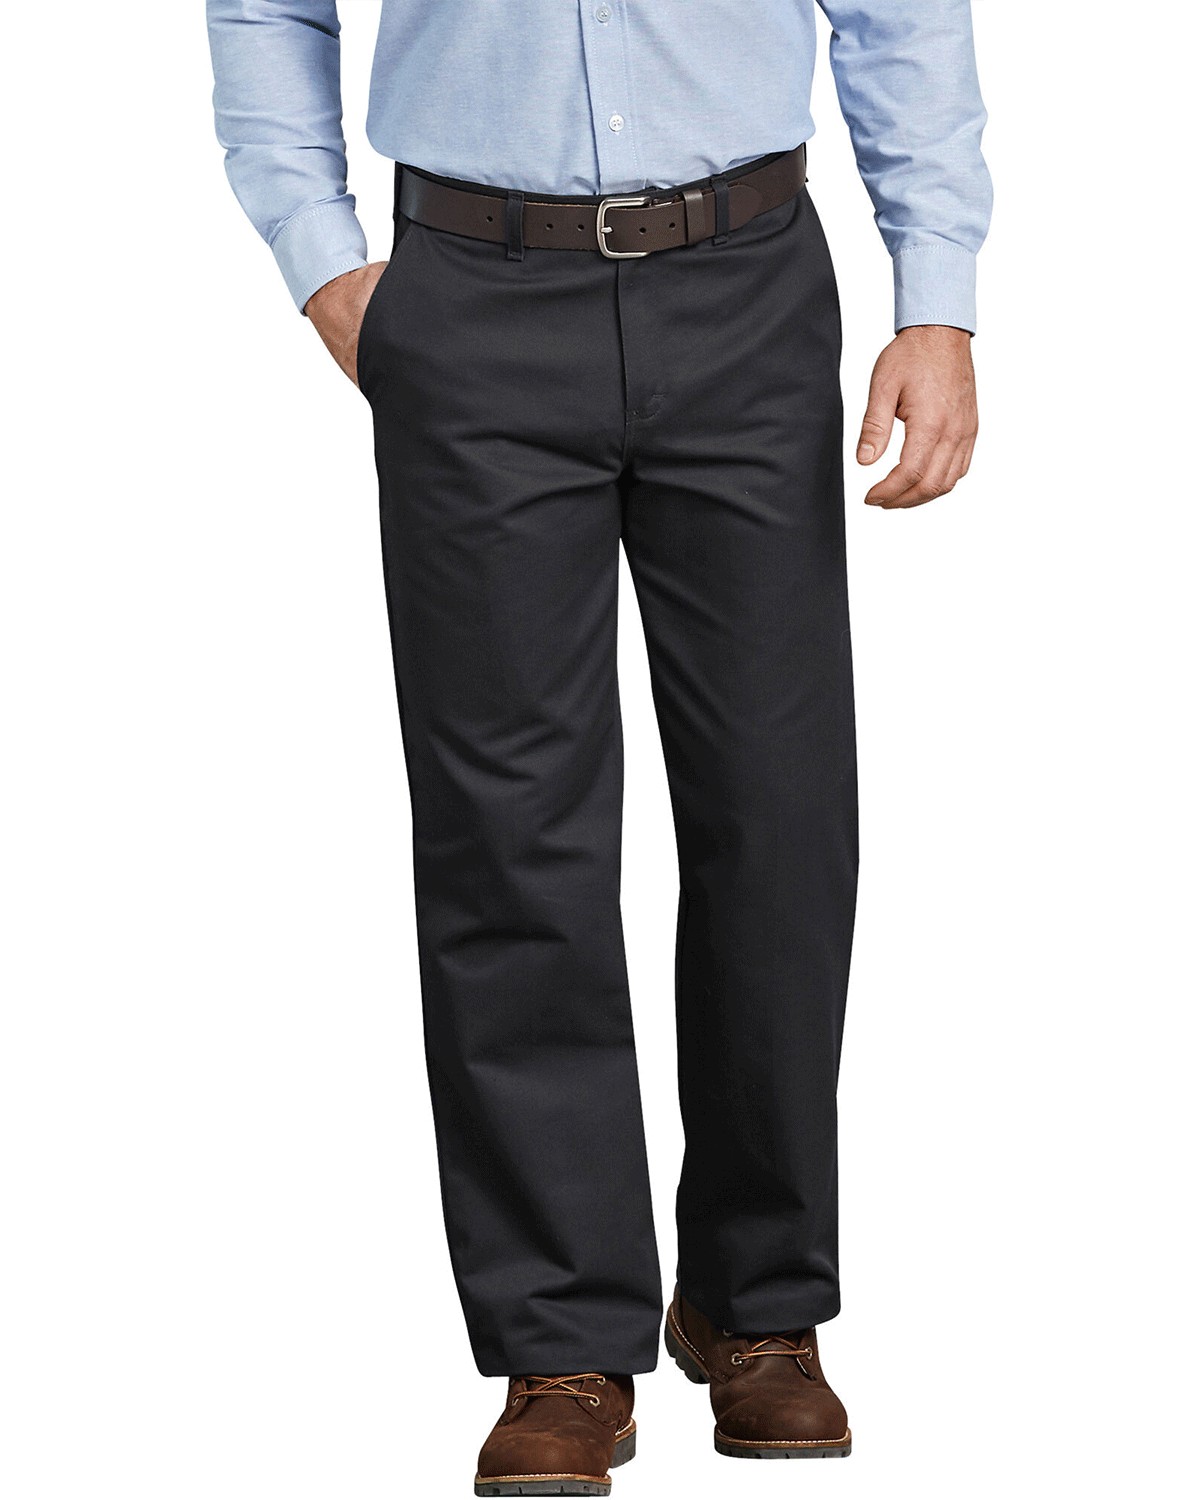 Dickies WP314 Relaxed Fit Cotton Flat Front Pant - ApparelnBags.com